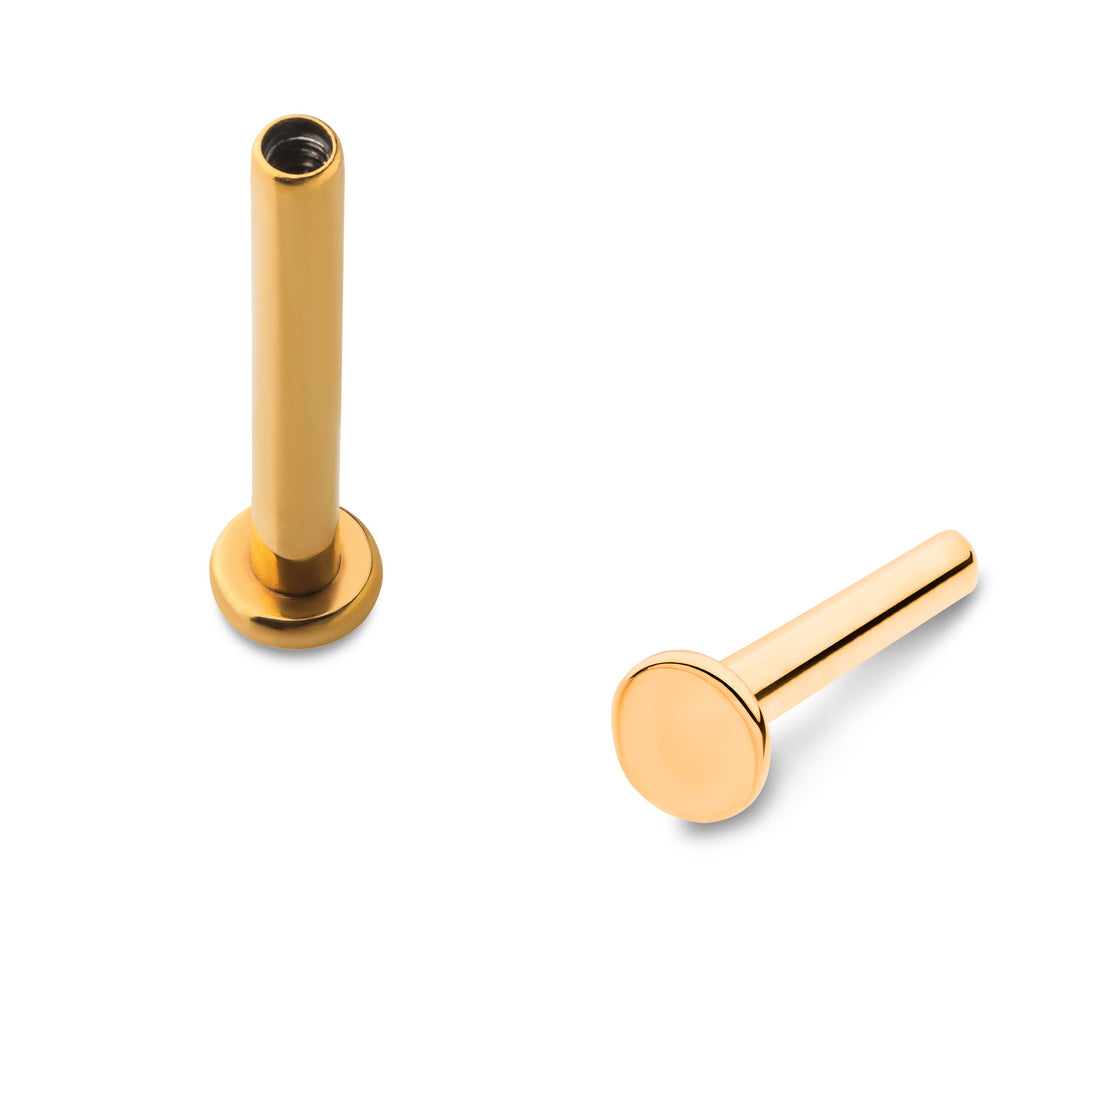 24K Gold PVD Titanium Internally Threaded Micro Labret Pin with 2.5mm Base